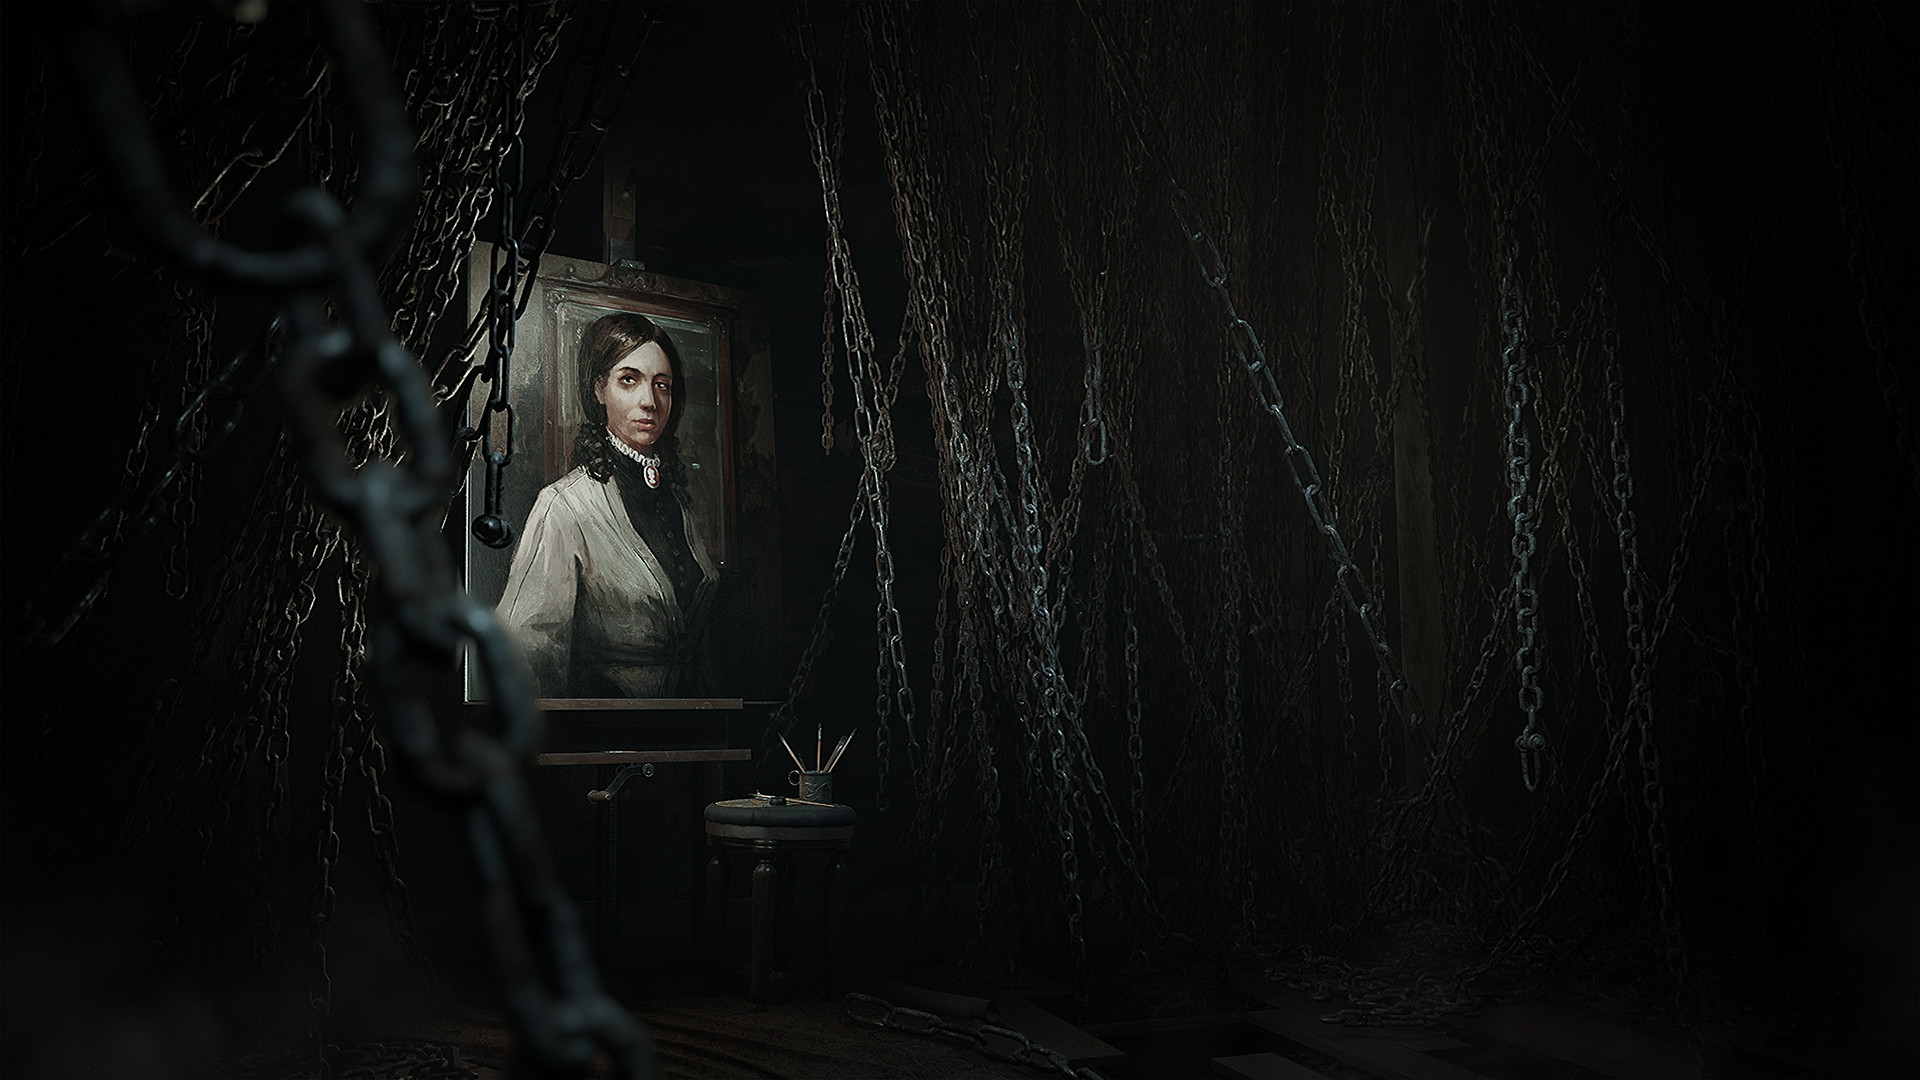 Layers Of Fear (2023) Steam CD Key